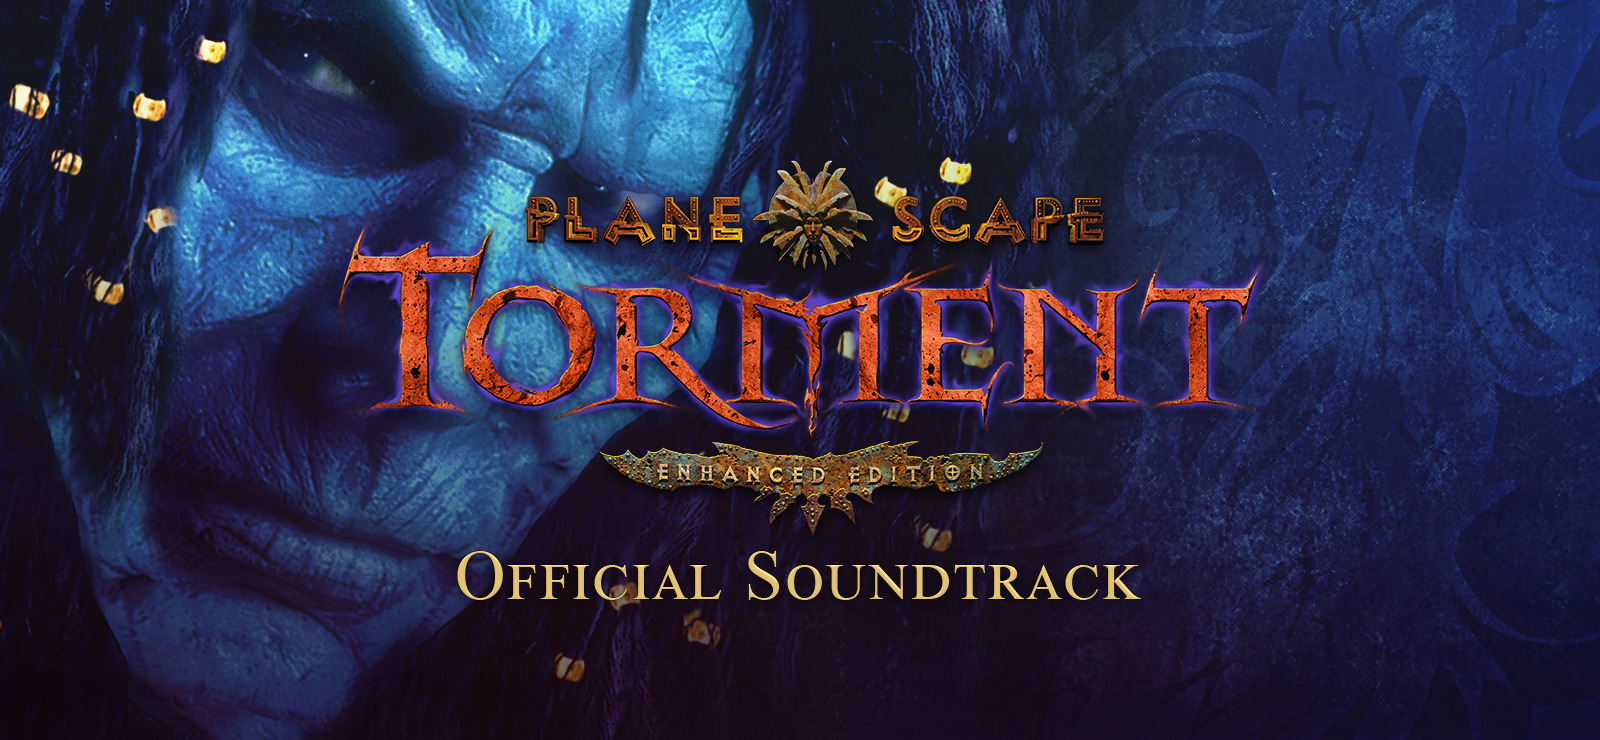 Planescape: Torment: Enhanced Edition Soundtrack on Official